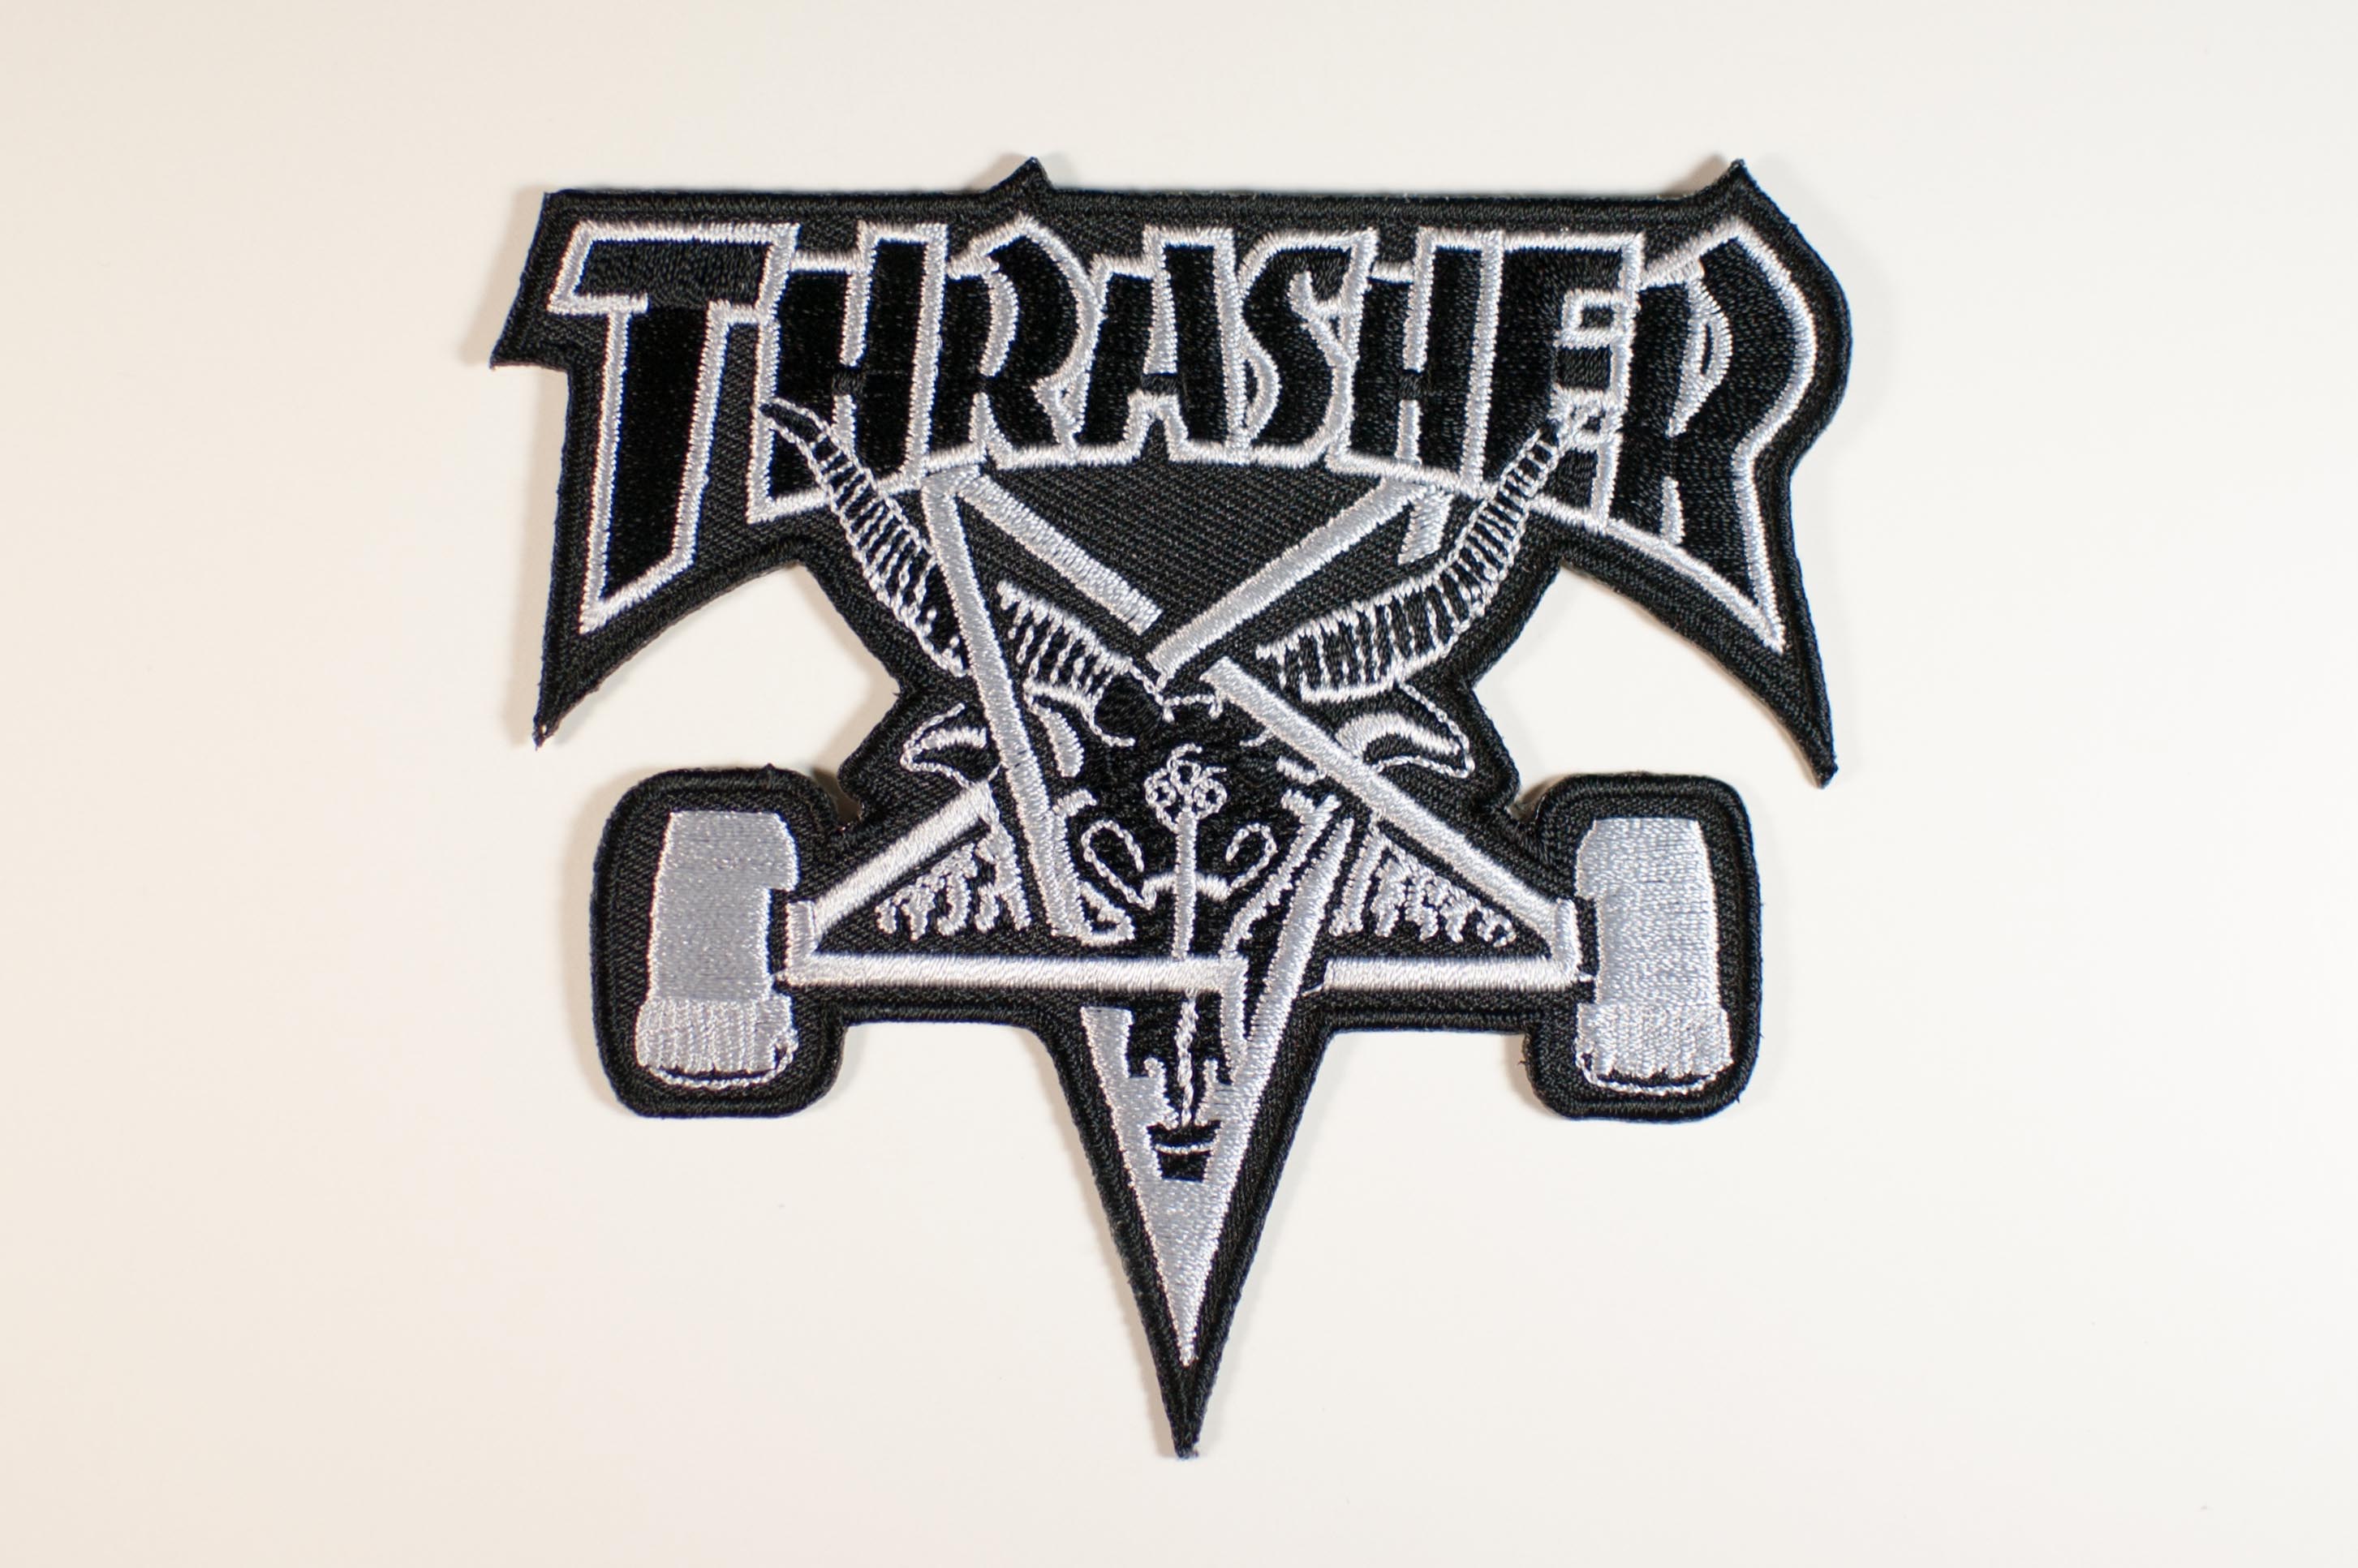 Thrasher Magazine Wallpapers Download Free